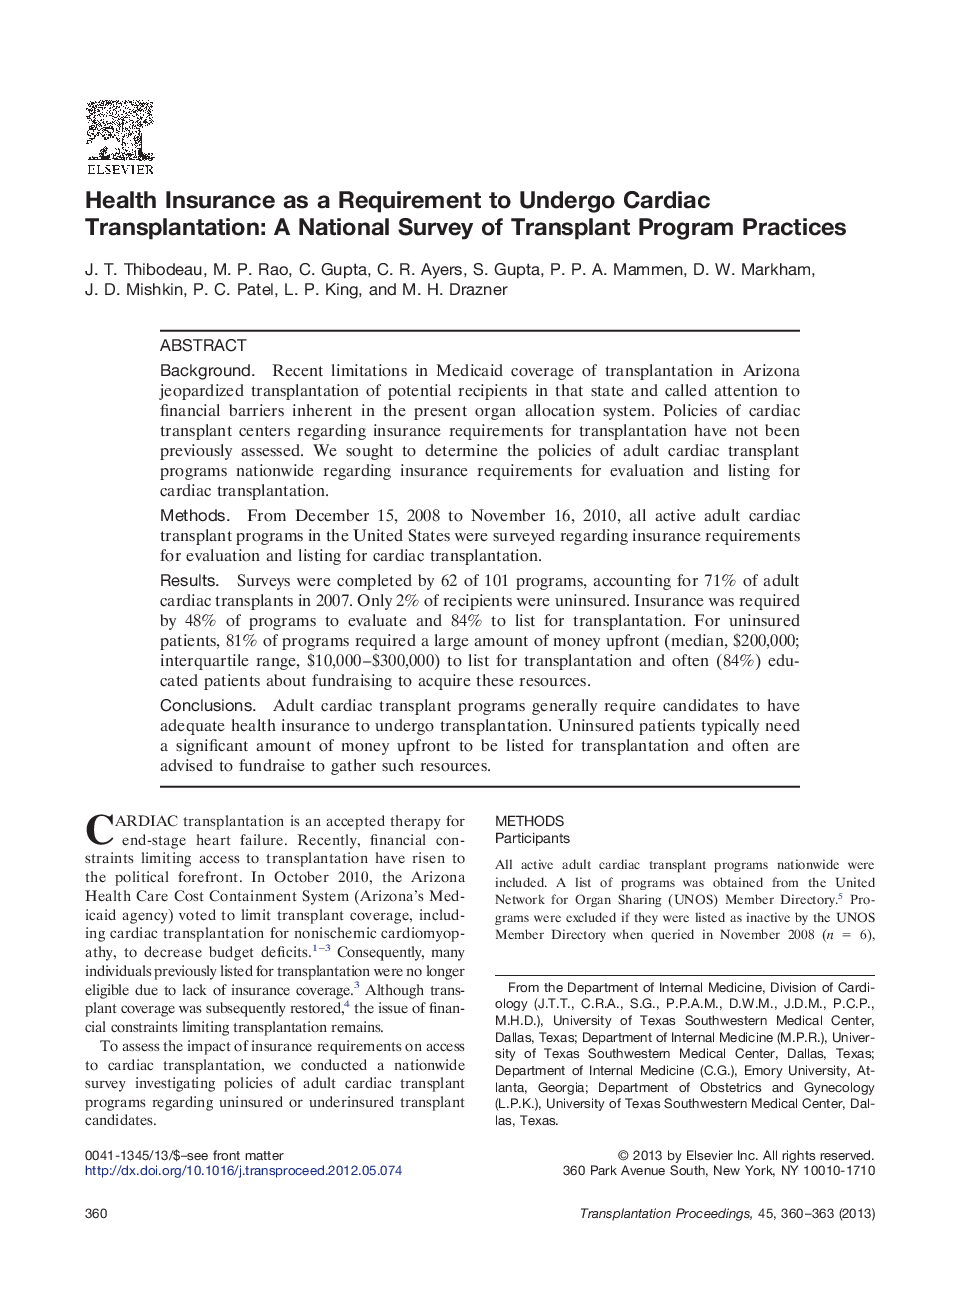 Health Insurance as a Requirement to Undergo Cardiac Transplantation: A National Survey of Transplant Program Practices